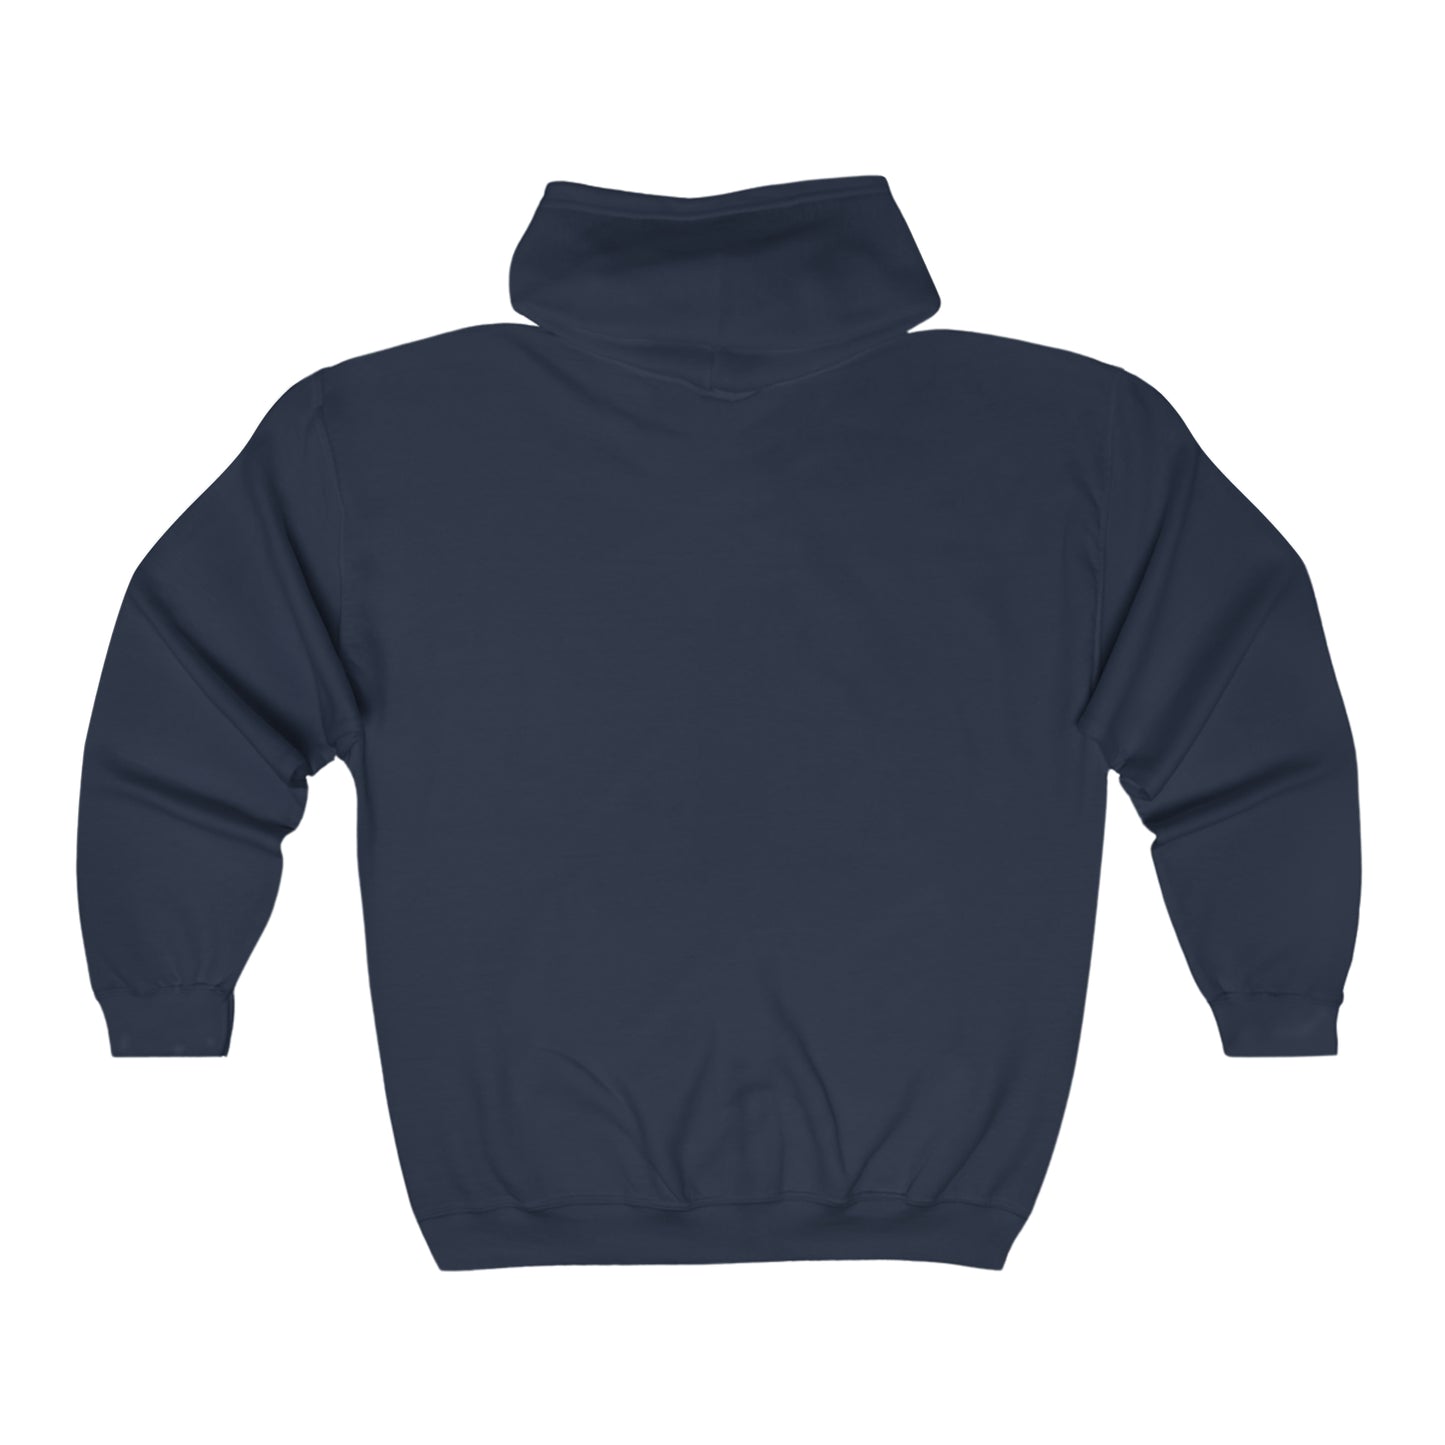 1st ANGLICO Hammer and Lightning Zip Hoodie